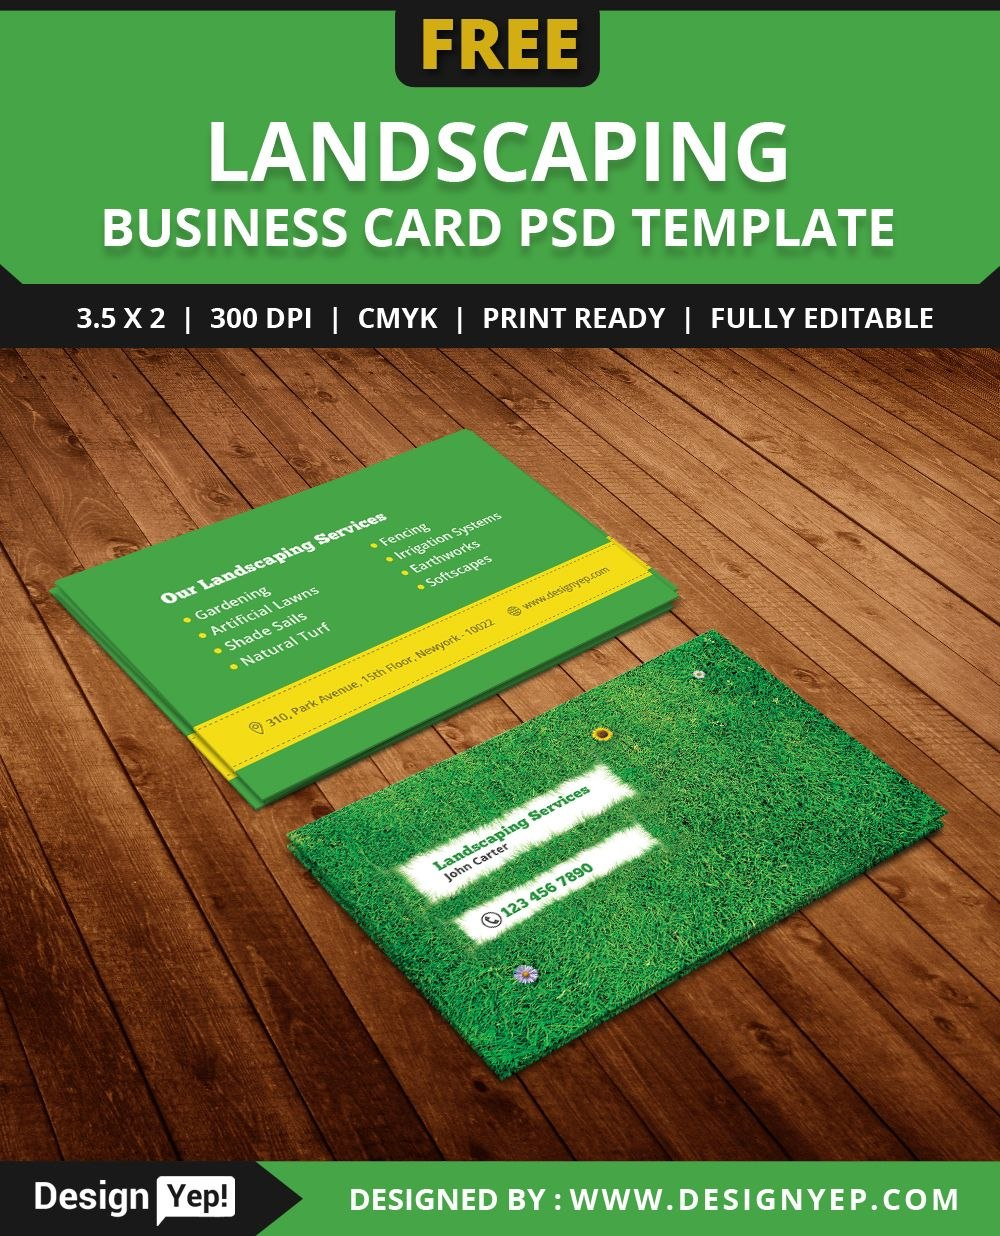 Freelandscapingbusinesscardtemplatepsd  Free Business Card intended for Gardening Business Cards Templates